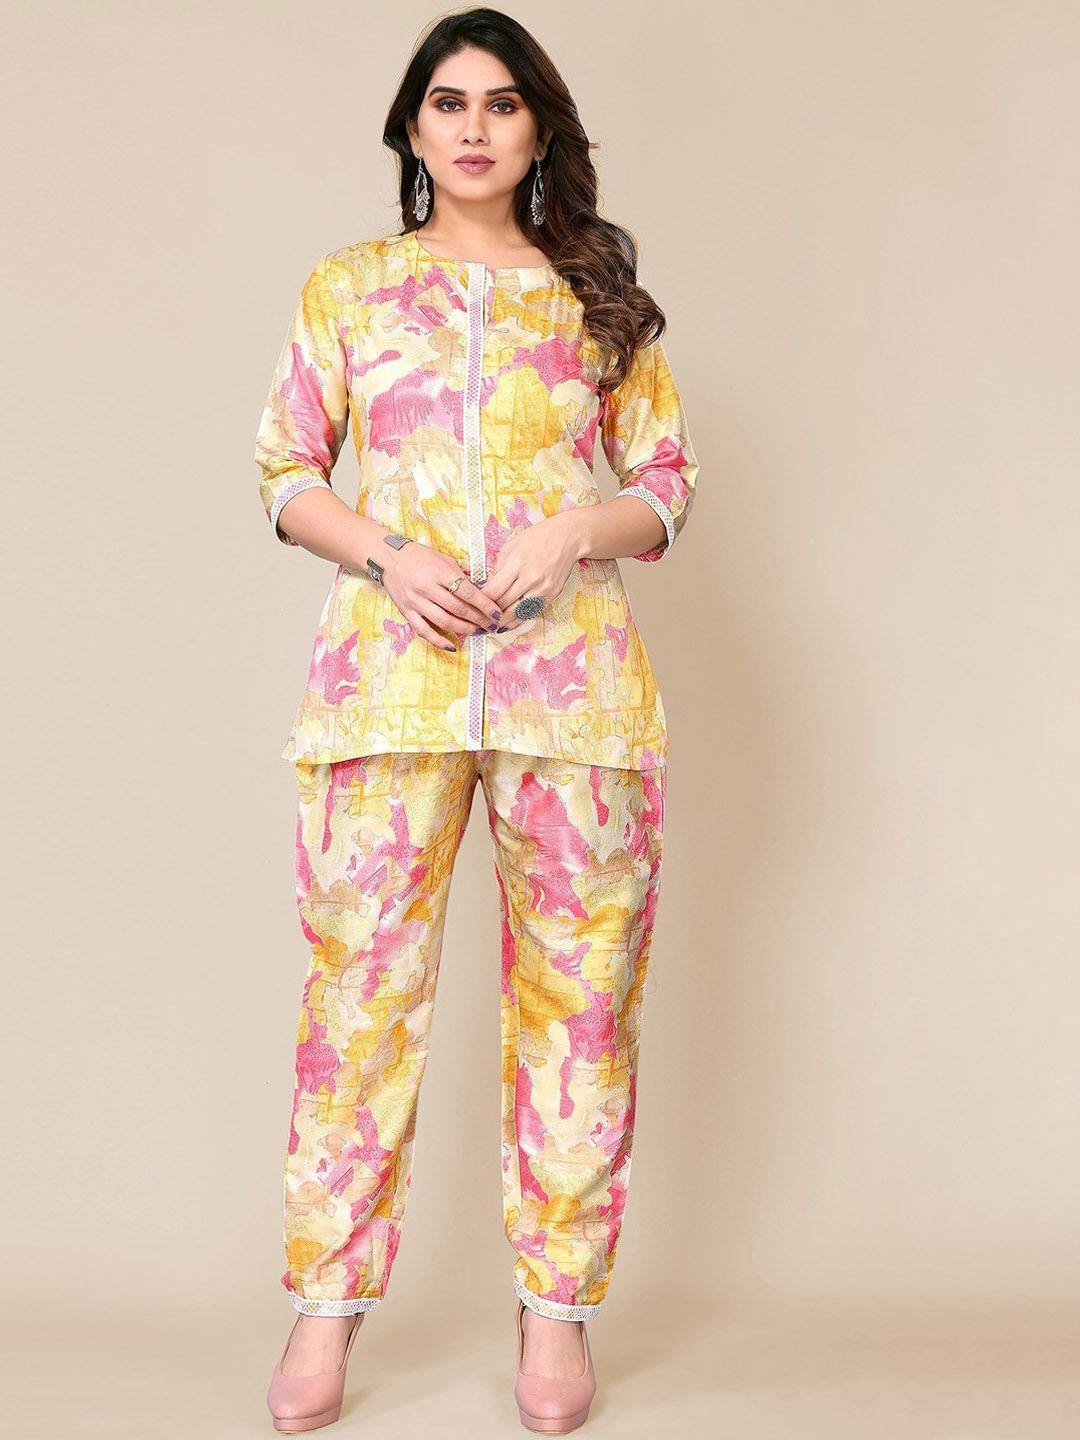 titanium silk industries pvt. ltd. printed top with matching trouser co-ords